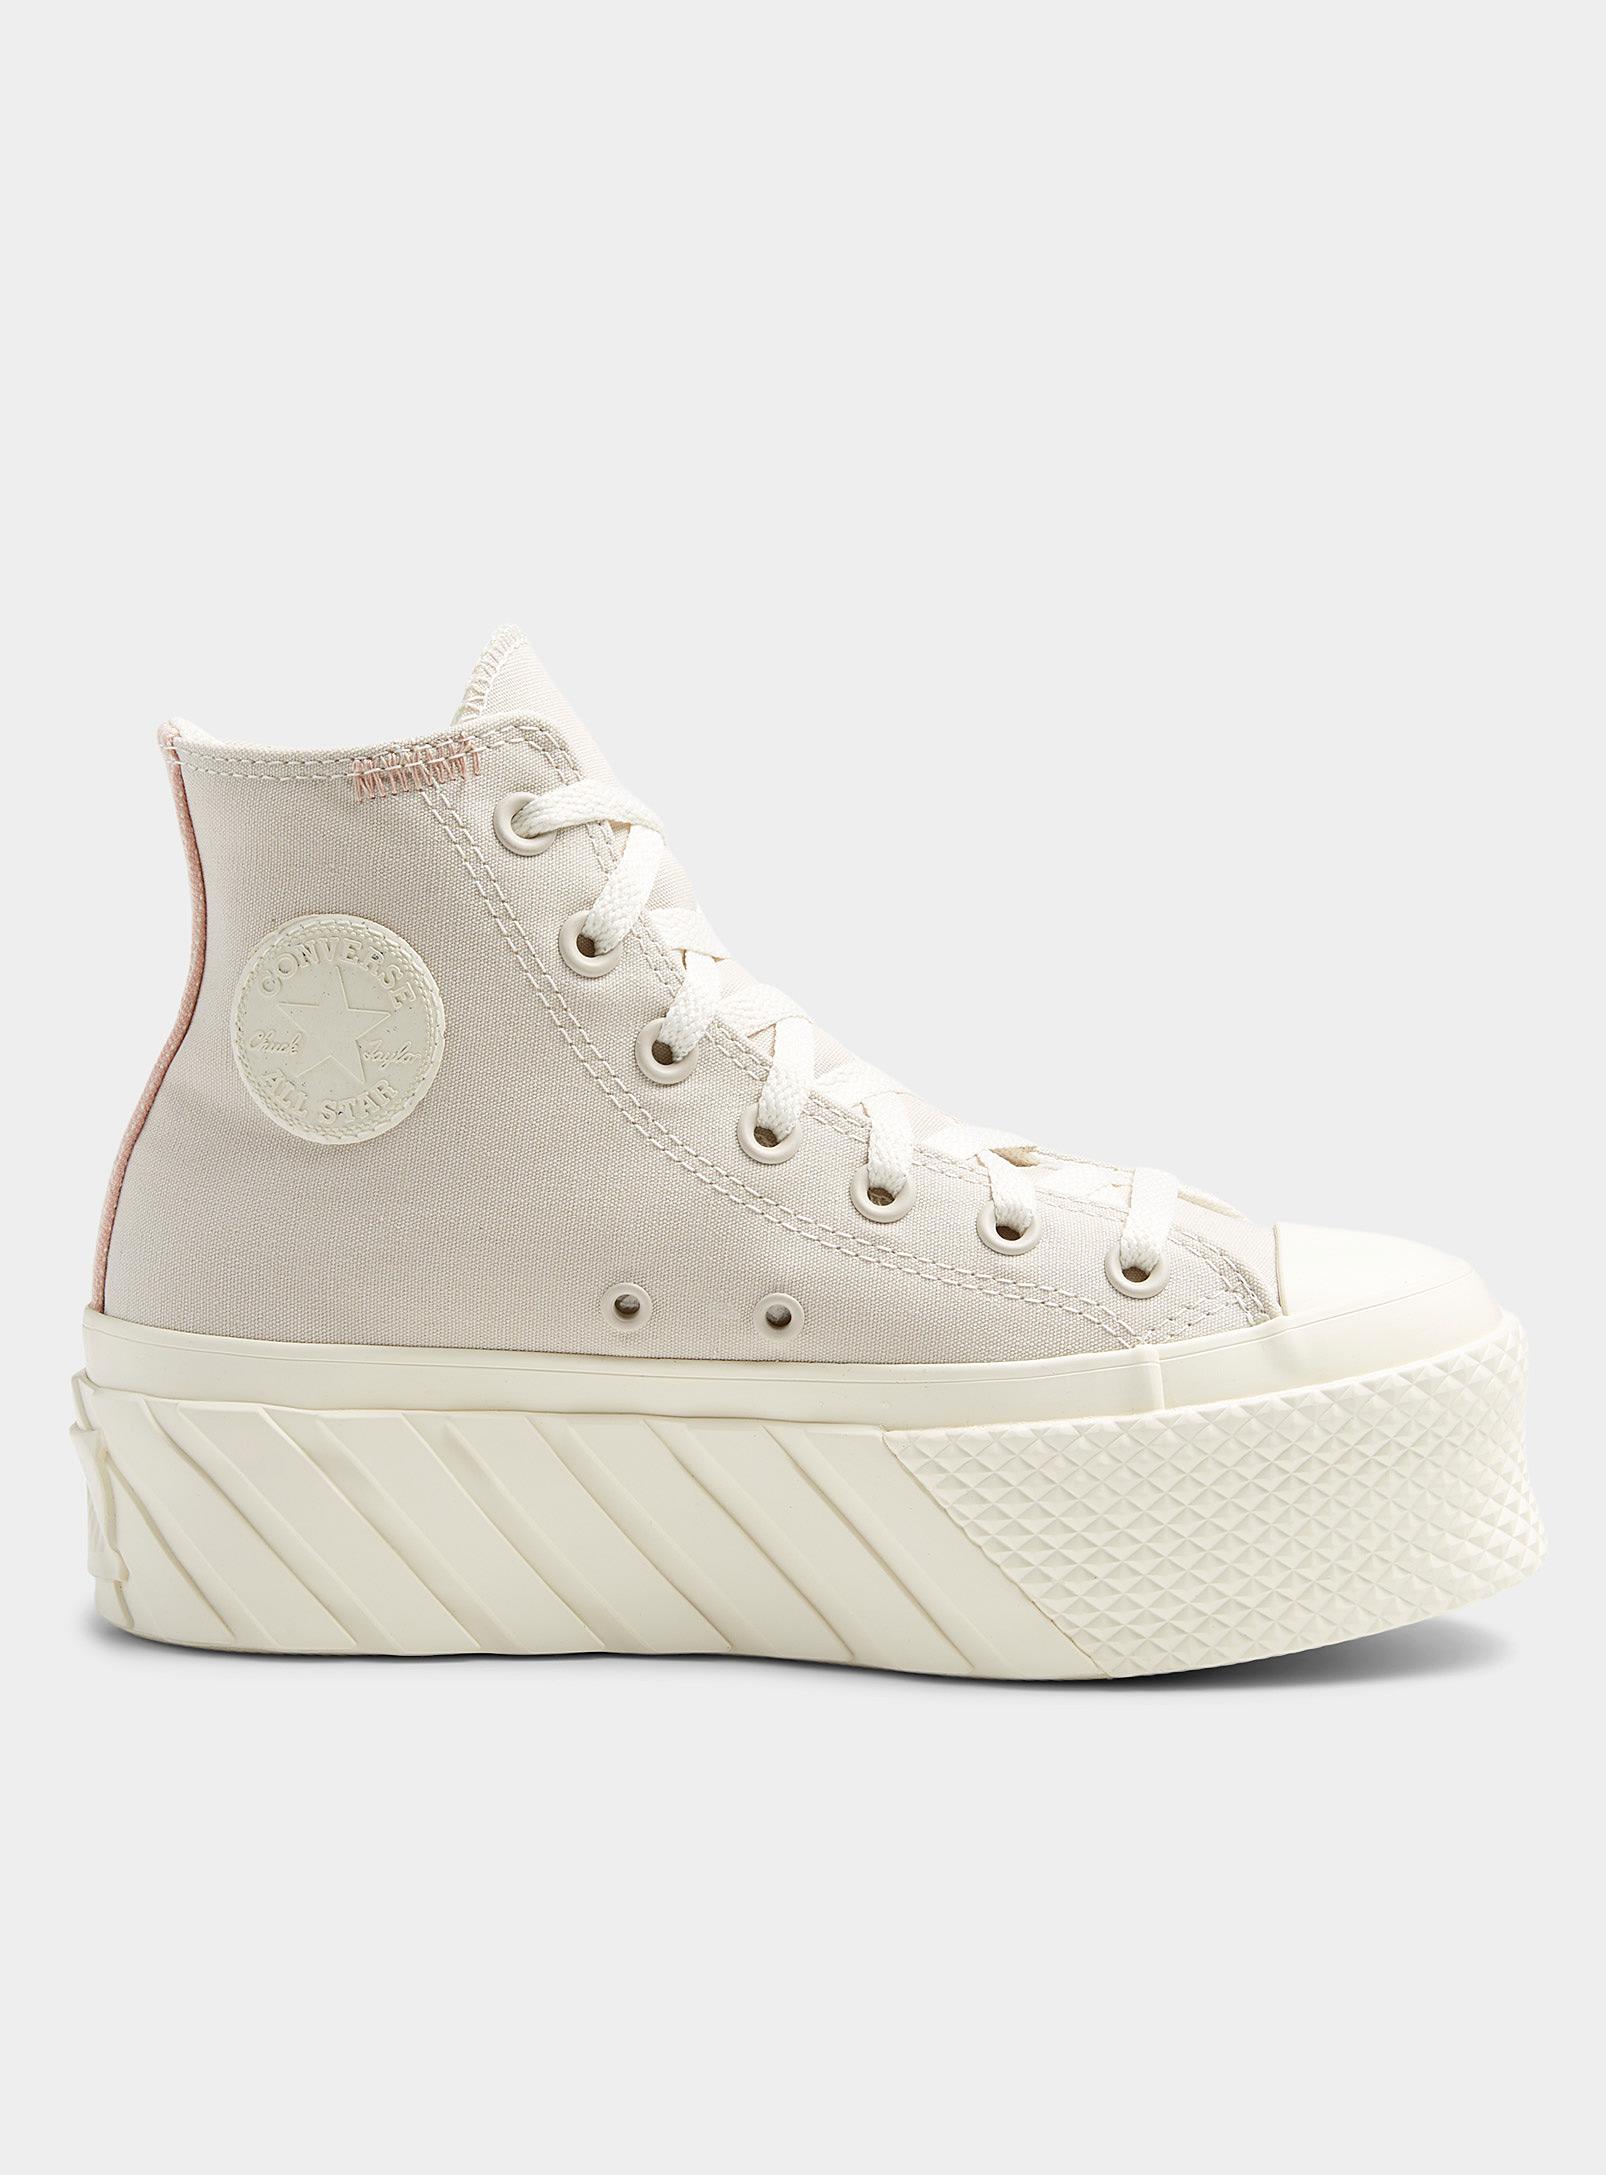 Converse Canvas Chuck Taylor All Star Lift 2x Platform Sneakers Women in  Ivory White (White) | Lyst